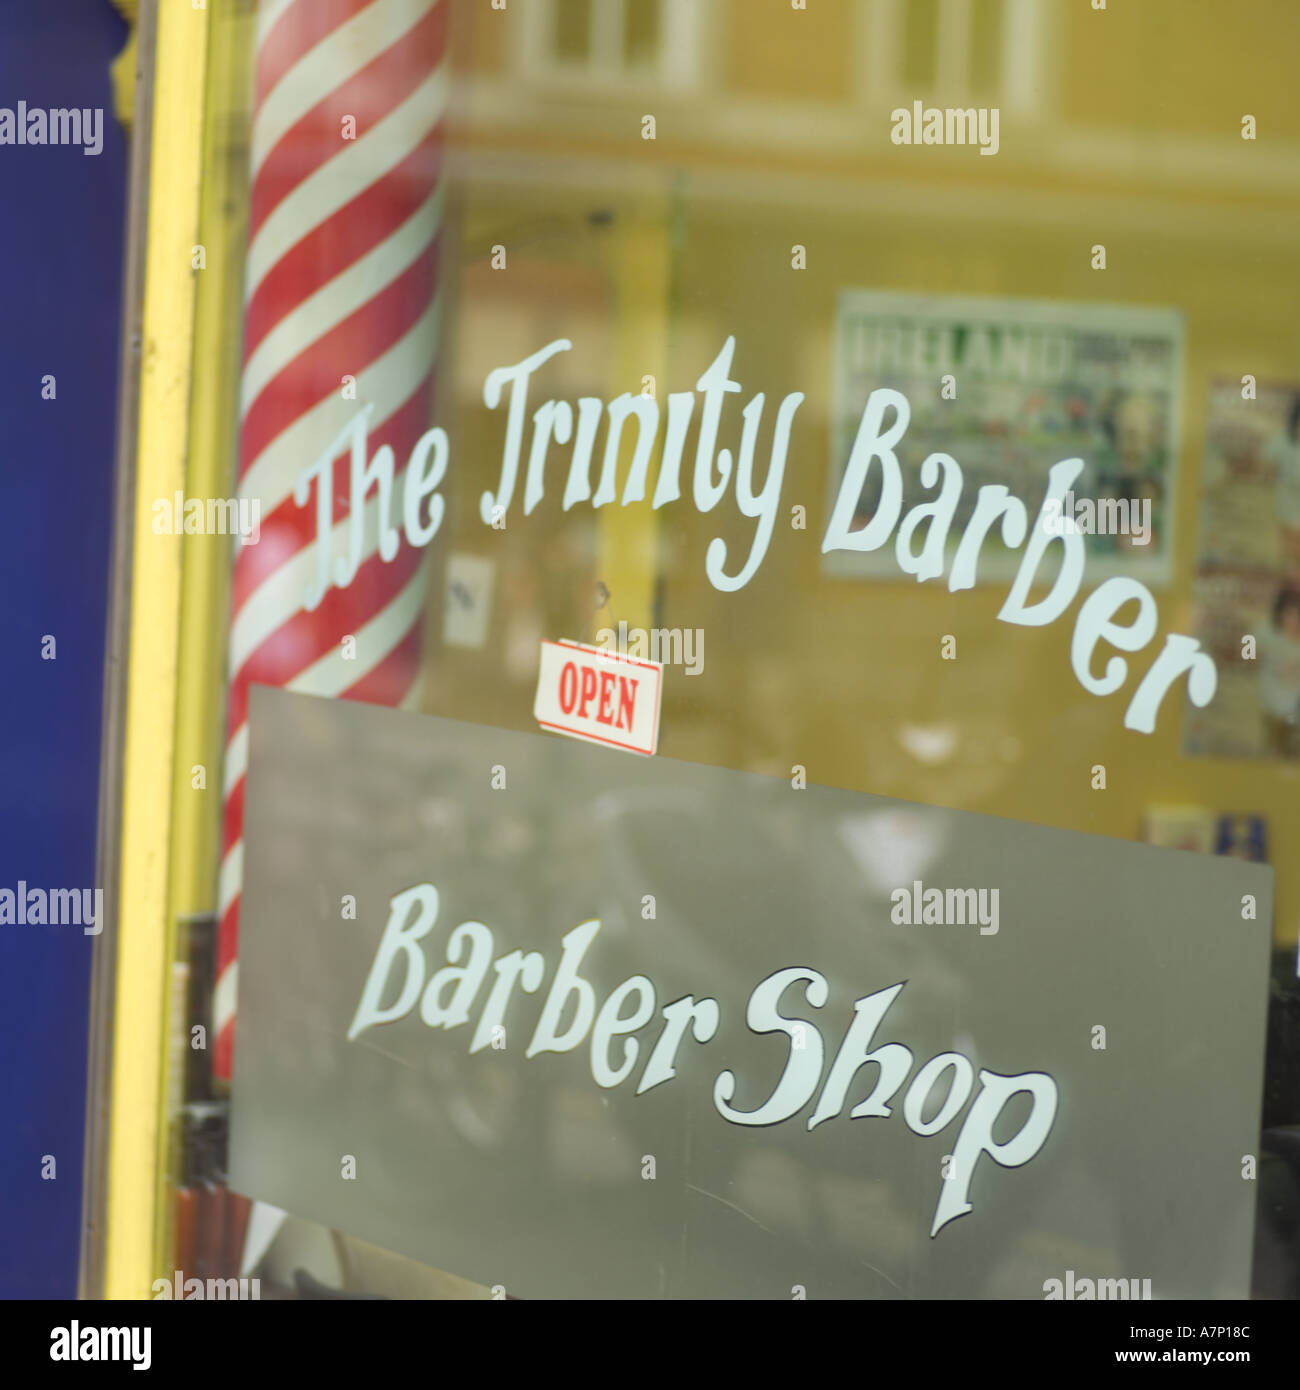 Page Alamy 3 photography and images stock hi-res - Barber - stripe